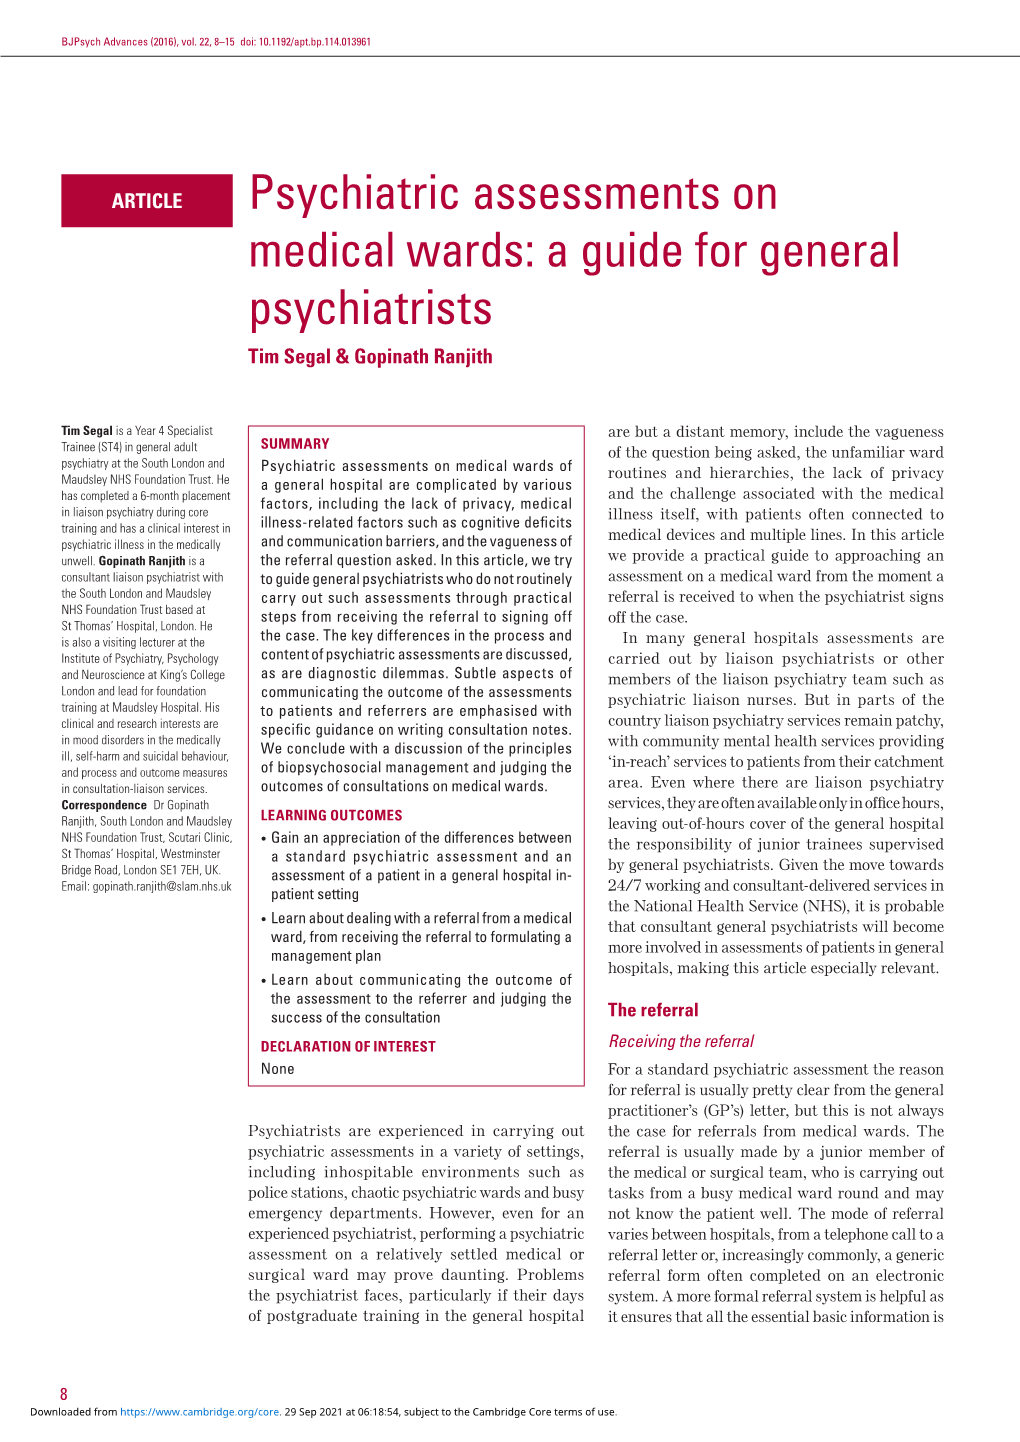 Psychiatric Assessments on Medical Wards: a Guide for General Psychiatrists Tim Segal & Gopinath Ranjith